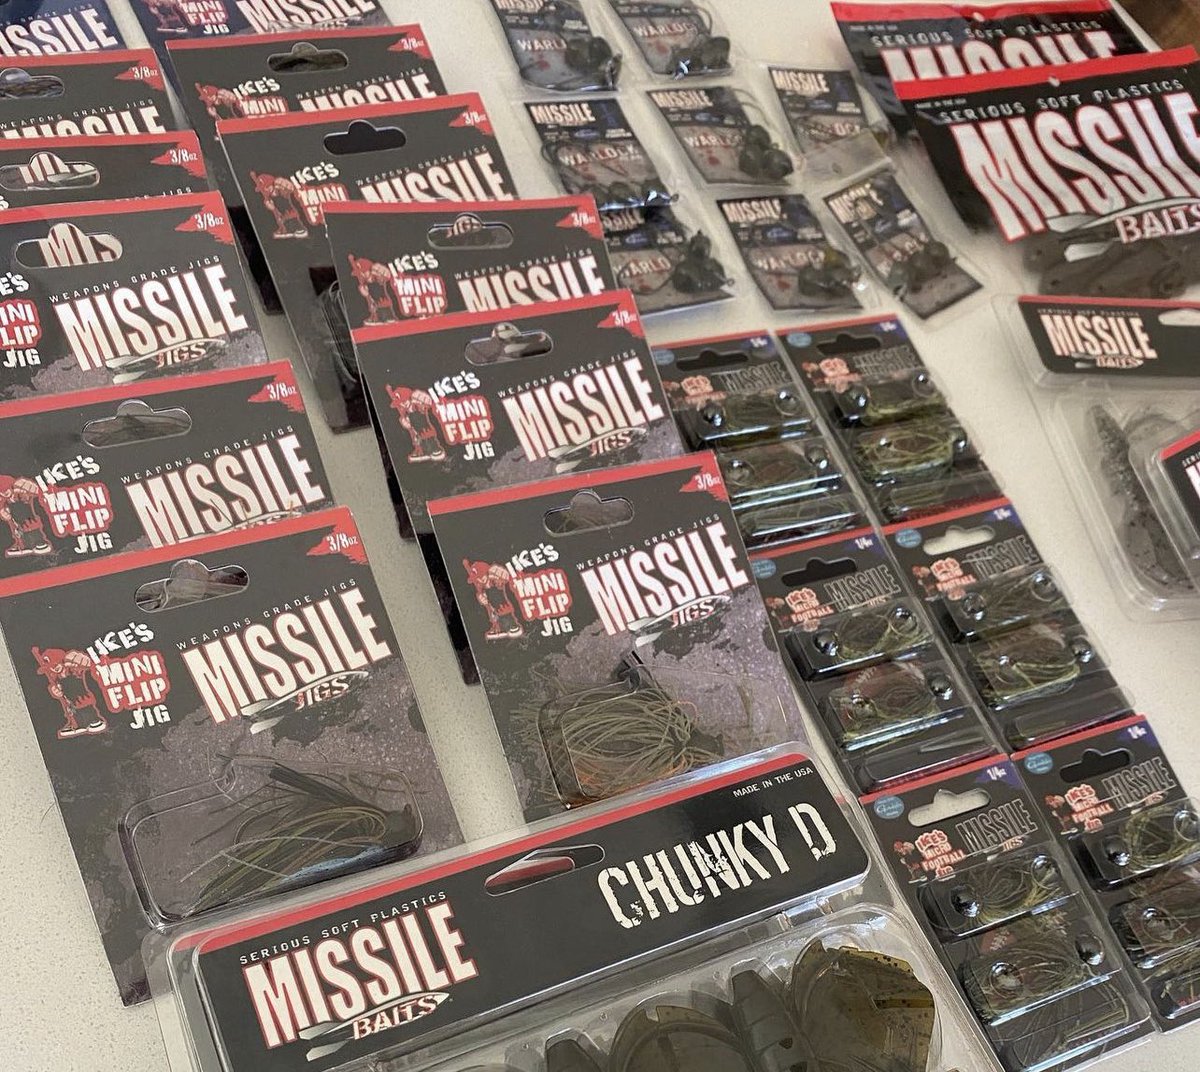 Bomb Squad Member, Gary Key, is loaded up on the goods for Lake Havasu! He says: “Ike’s Micro Football Jig w/ a cut down Baby D Bomb is straight smallmouth candy!” 🎣💯 #missilejigs #bombsquad #jigfishing